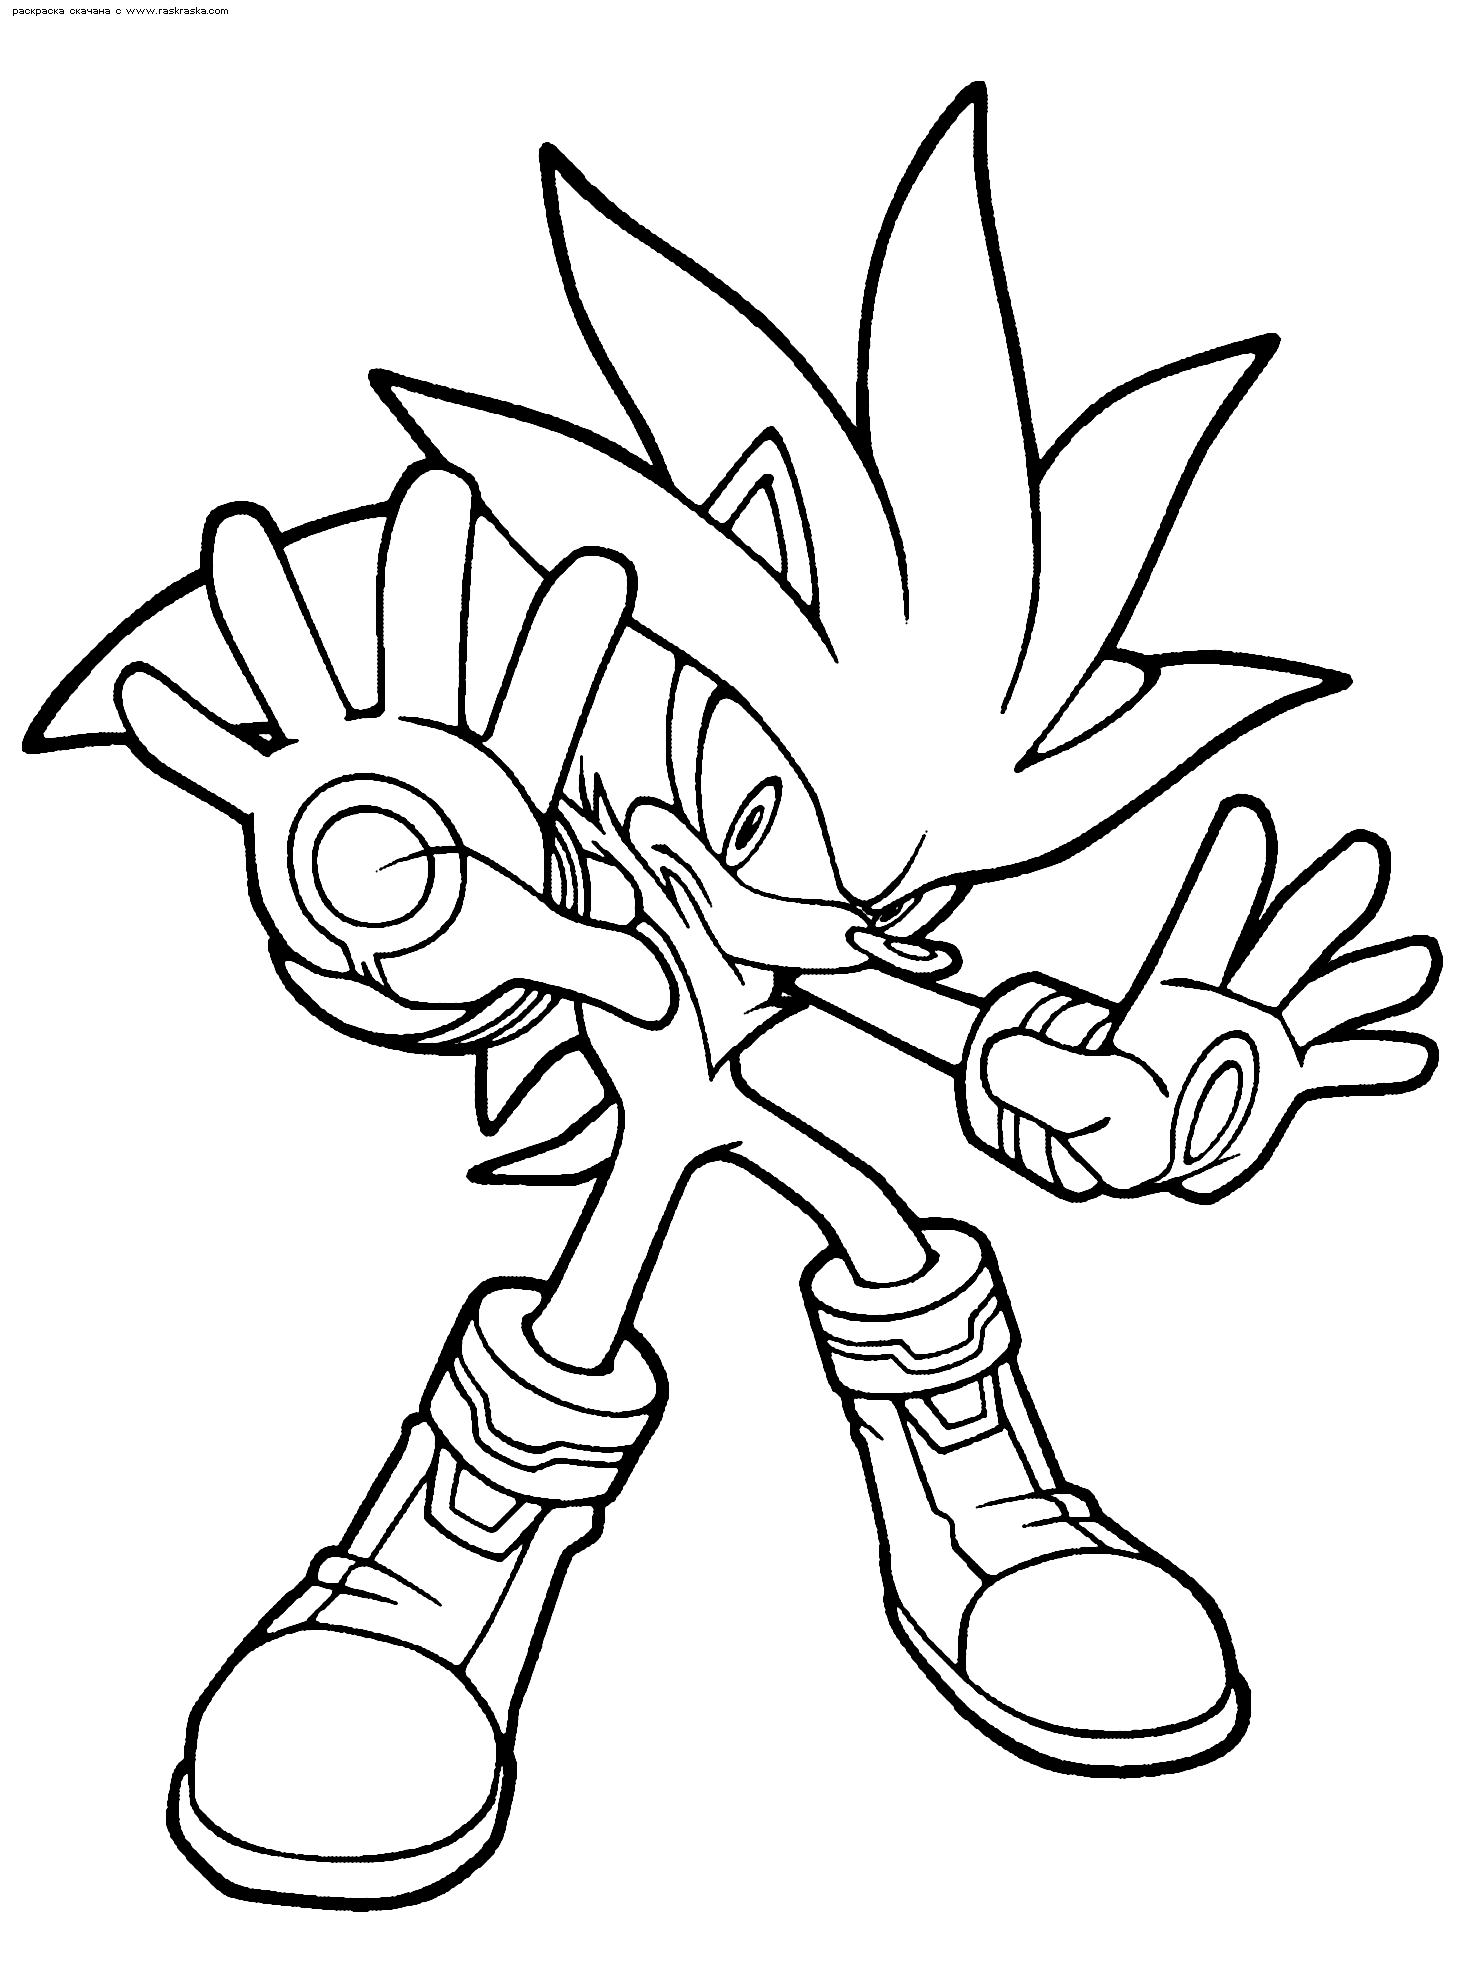 Sonic Colouring Sheets 1